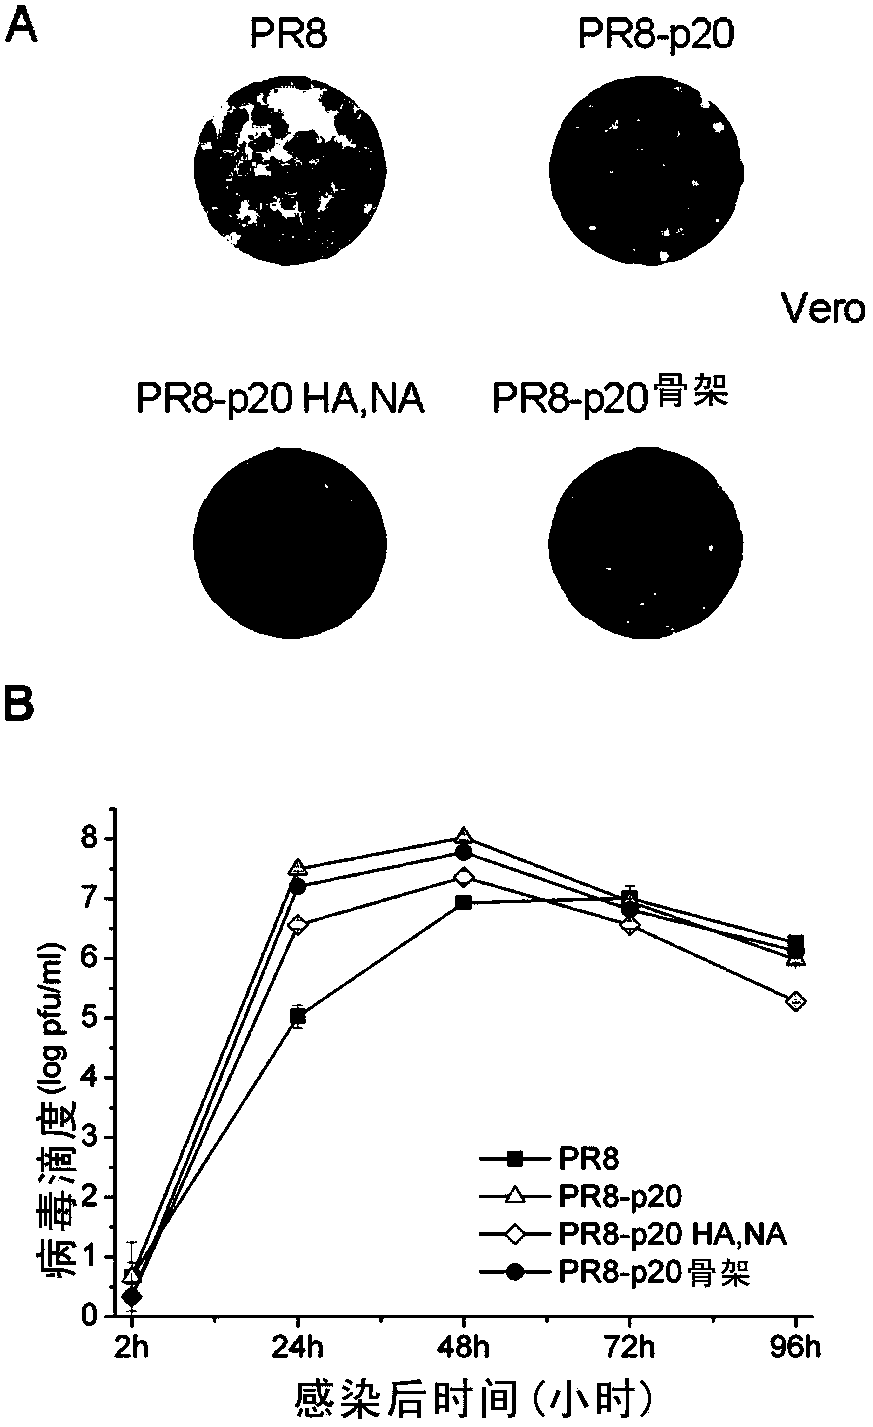 Obtaining method and adaptation site of mammalian cell-adapted strain of influenza A virus vaccine